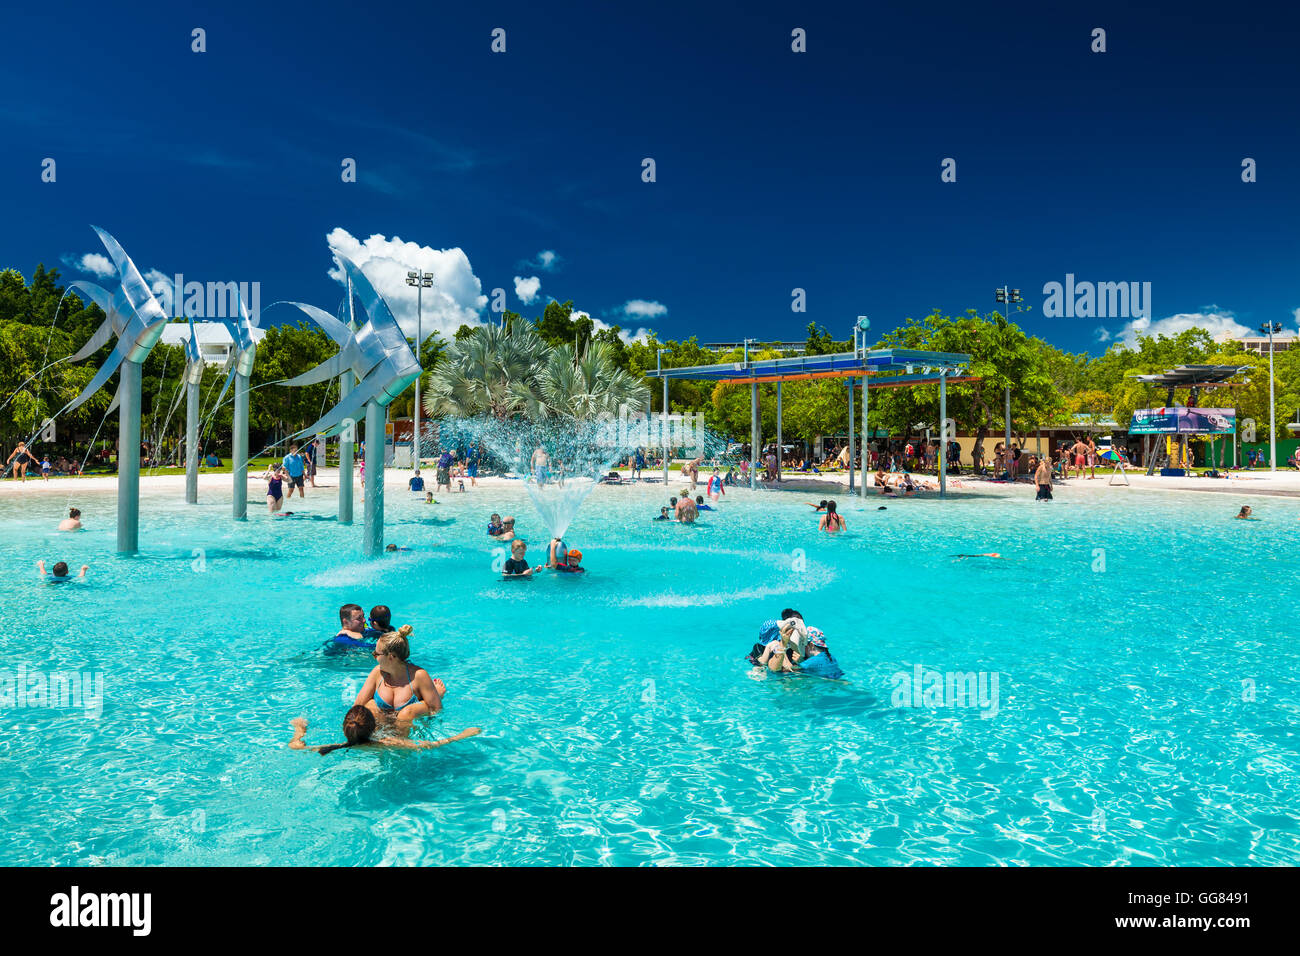 CAIRNS, AUSTRALIA - 27 MARCH 2016. Tropical swimming lagoon on the Esplanade in Cairns with artificial beach, Queensland, Austra Stock Photo